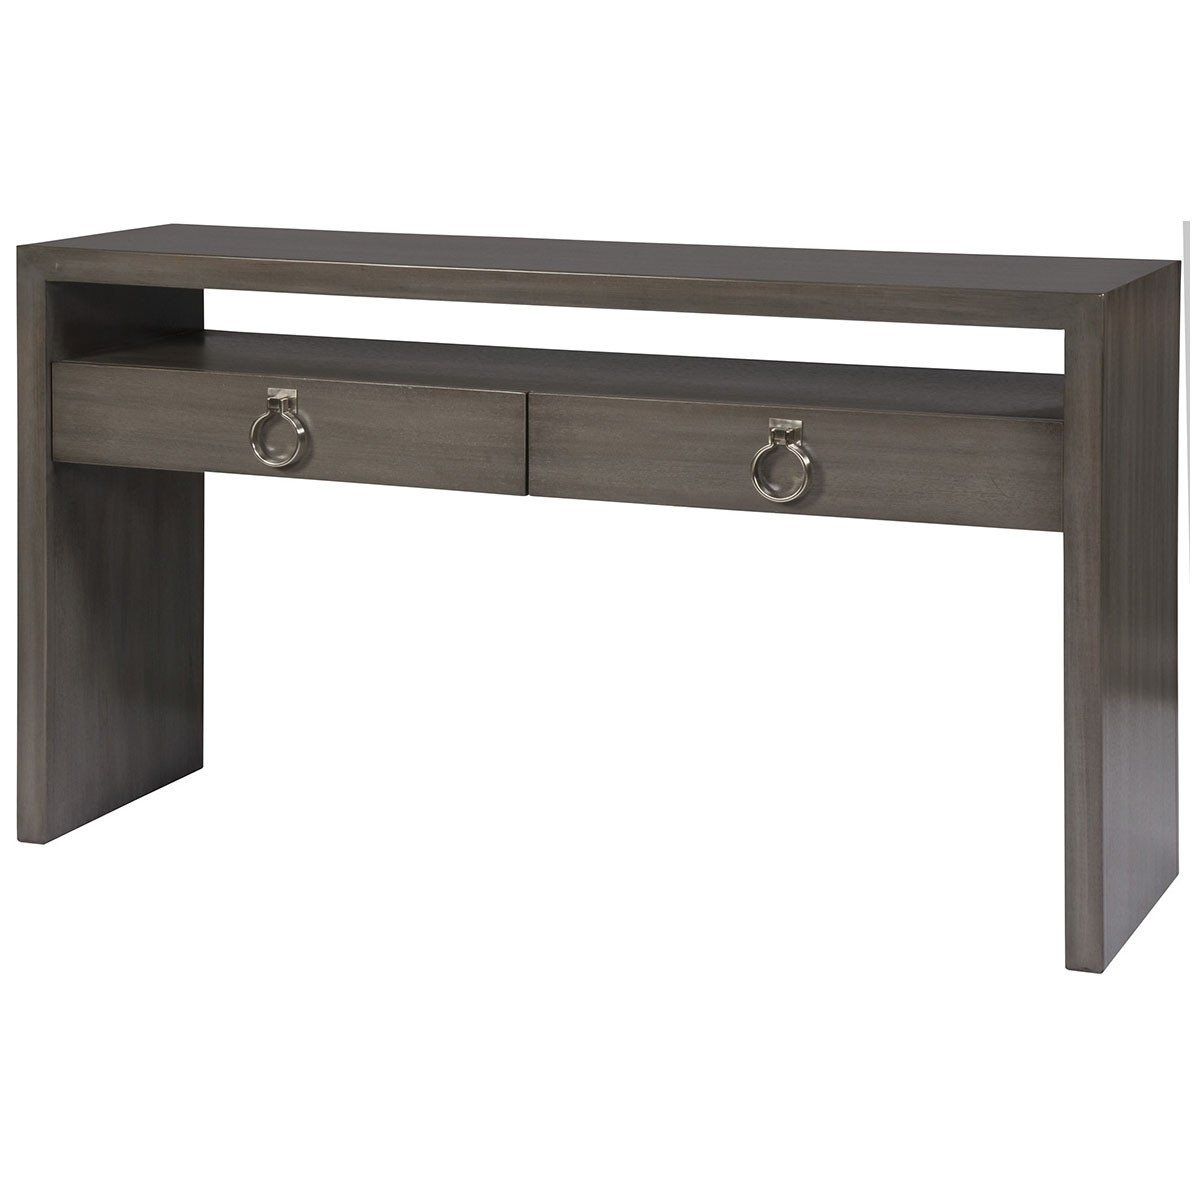 Parsons Concrete Top & Elm Base 48x16 Console Tables Inside Widely Used Vanguard Furniture Margo Console (View 8 of 20)